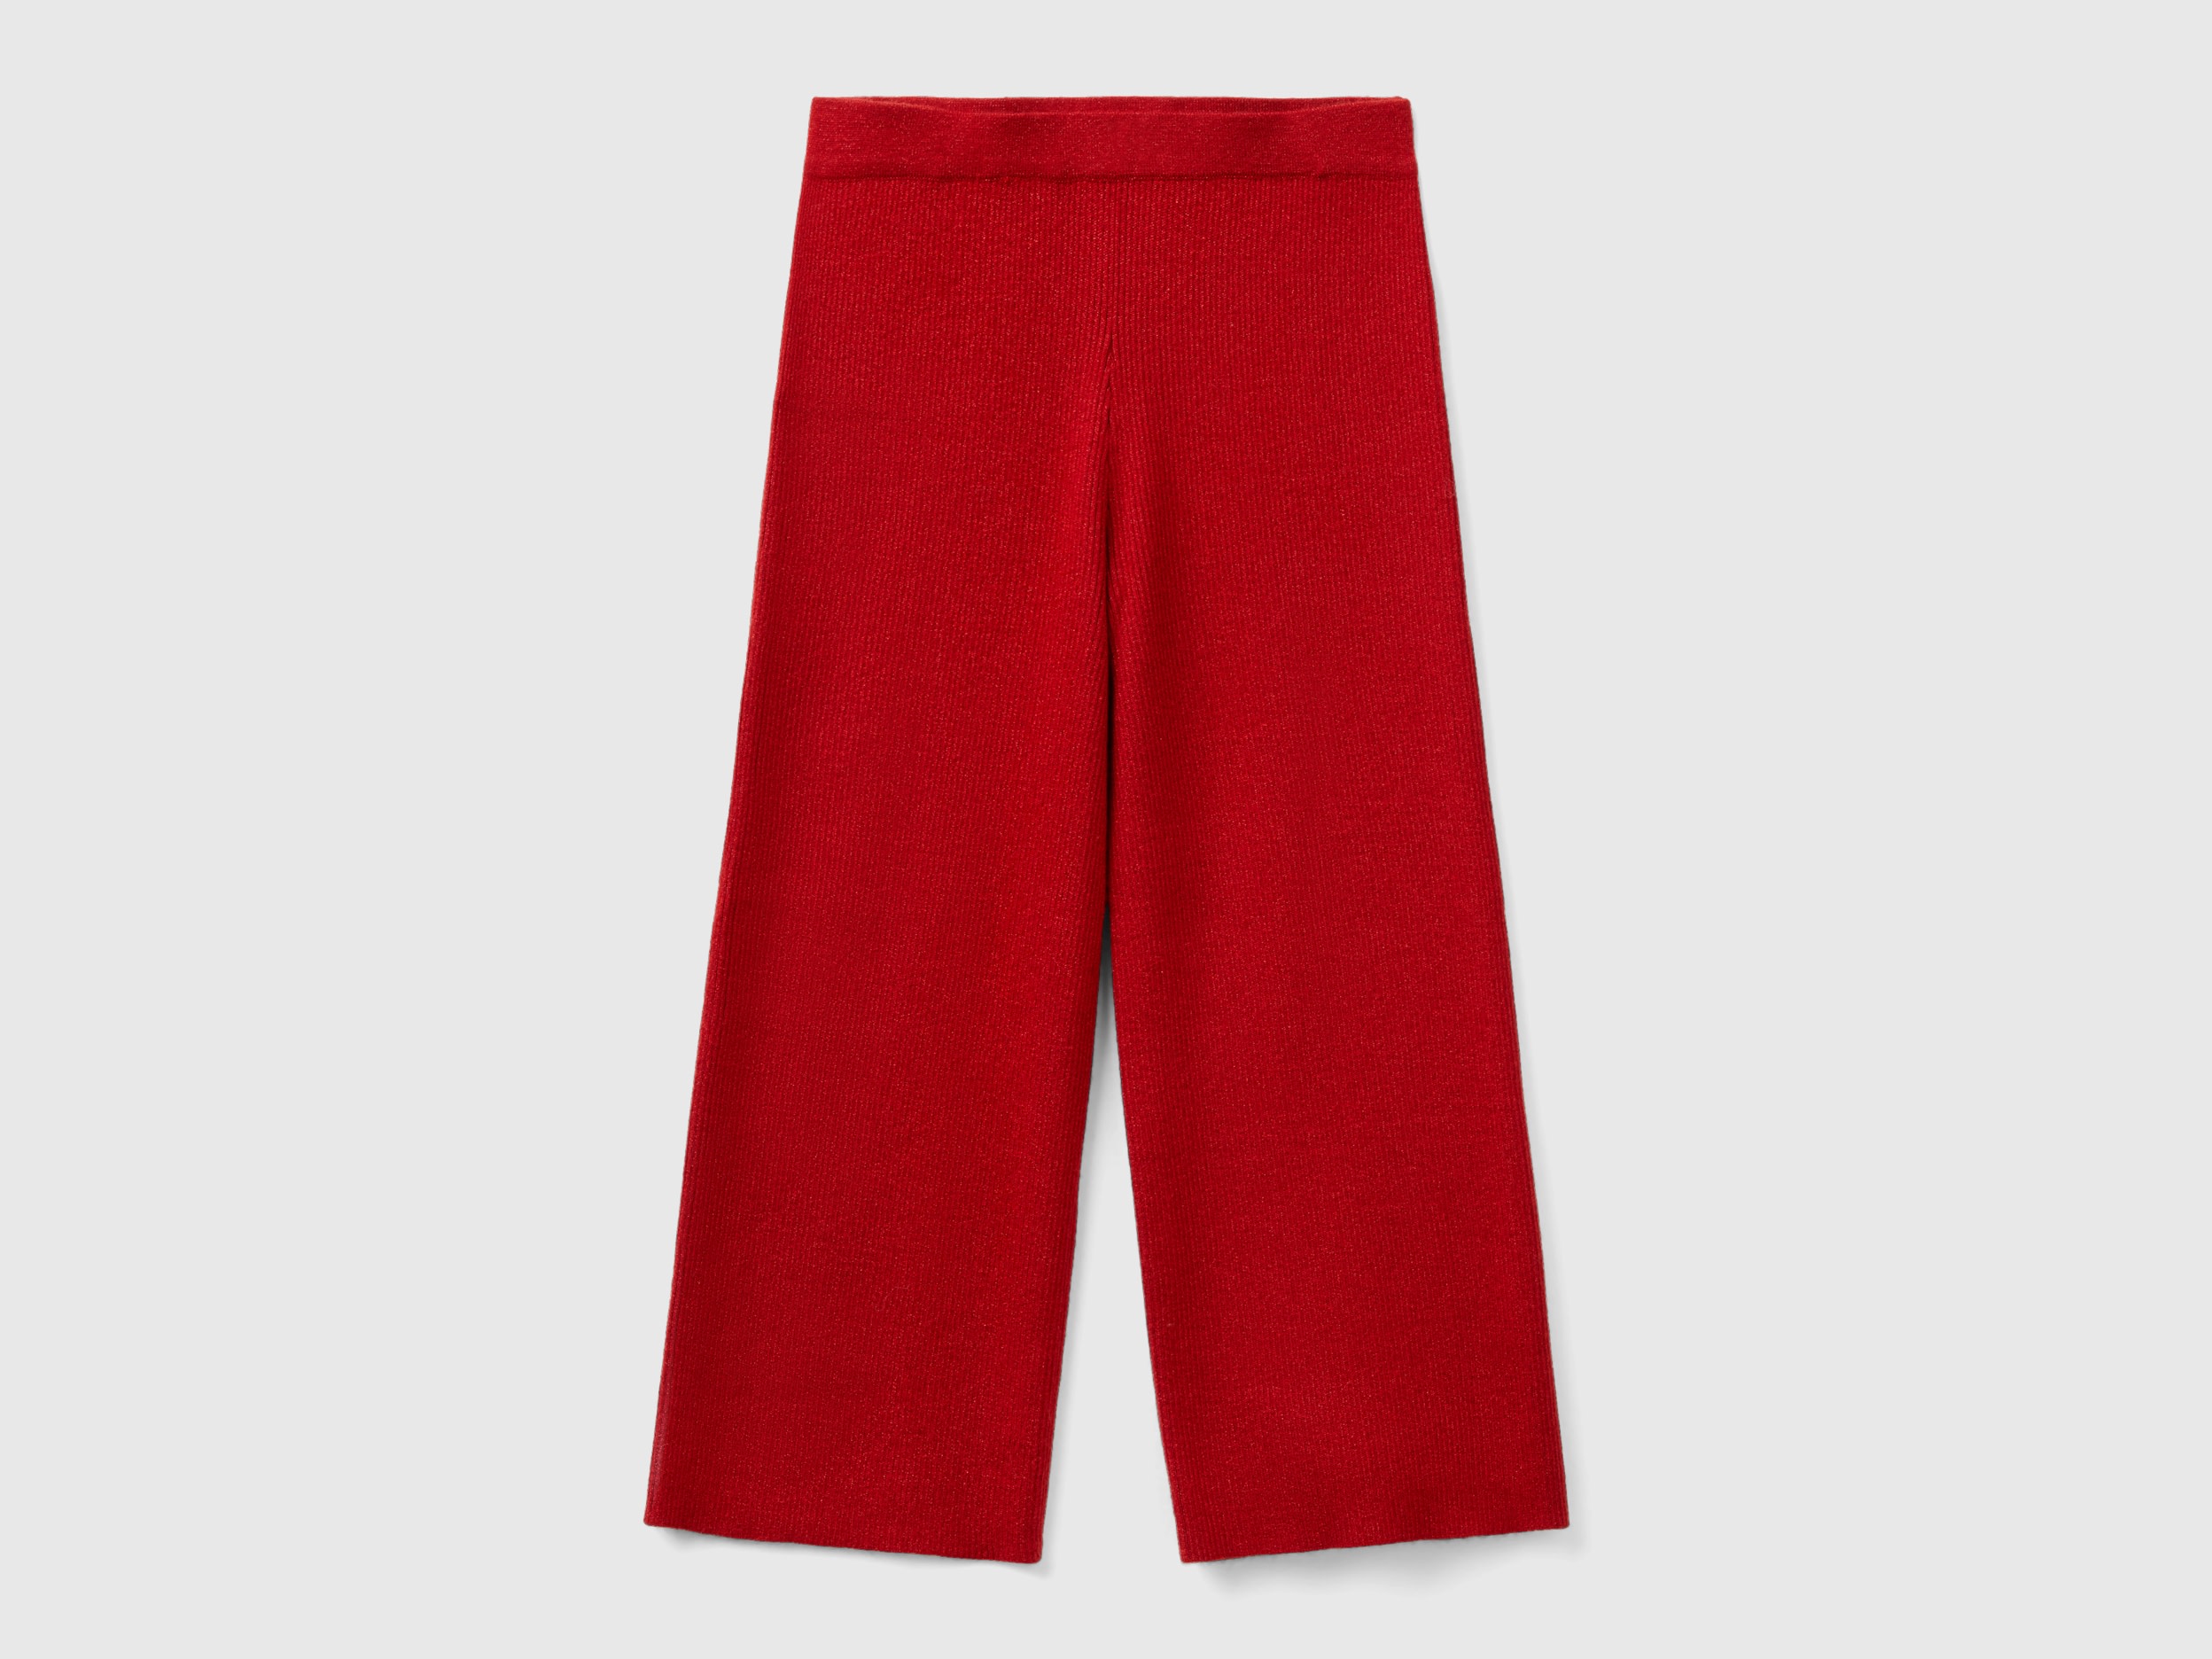 Benetton, Knit Pants With Lurex, size M, Red, Kids